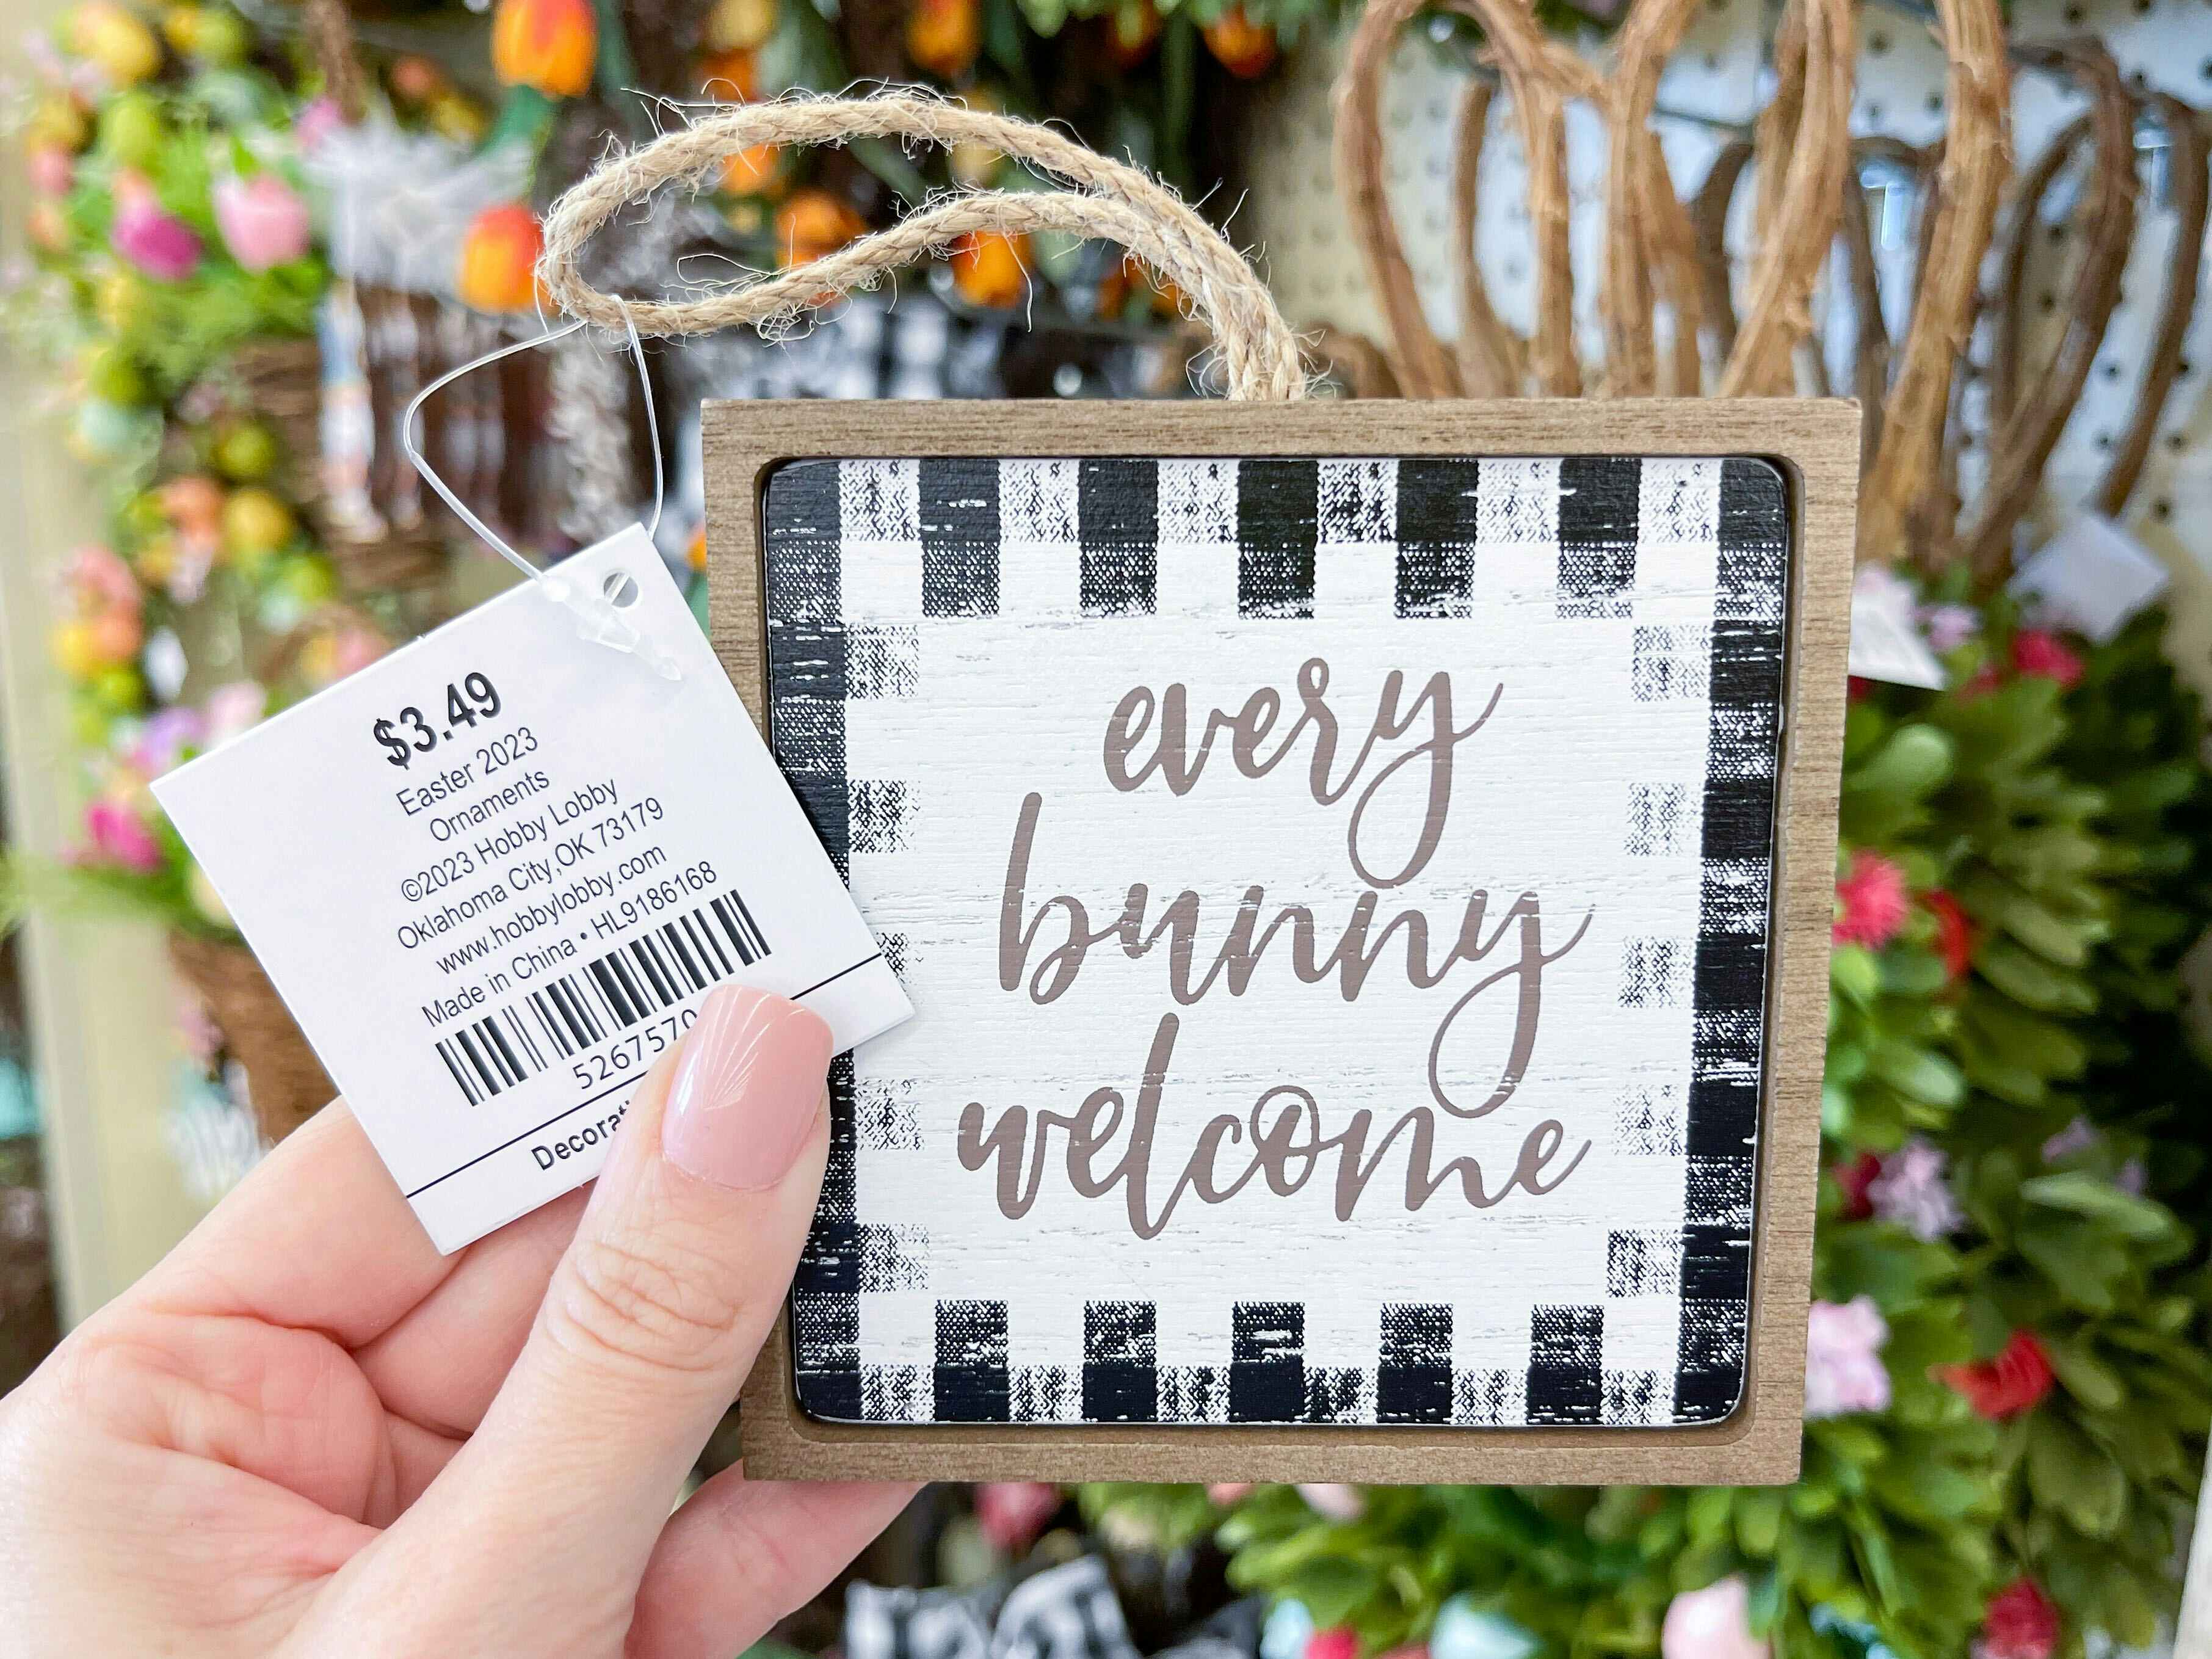 Hand holding a Sign that reads, " Every bunny welcome" at Hobby Lobby